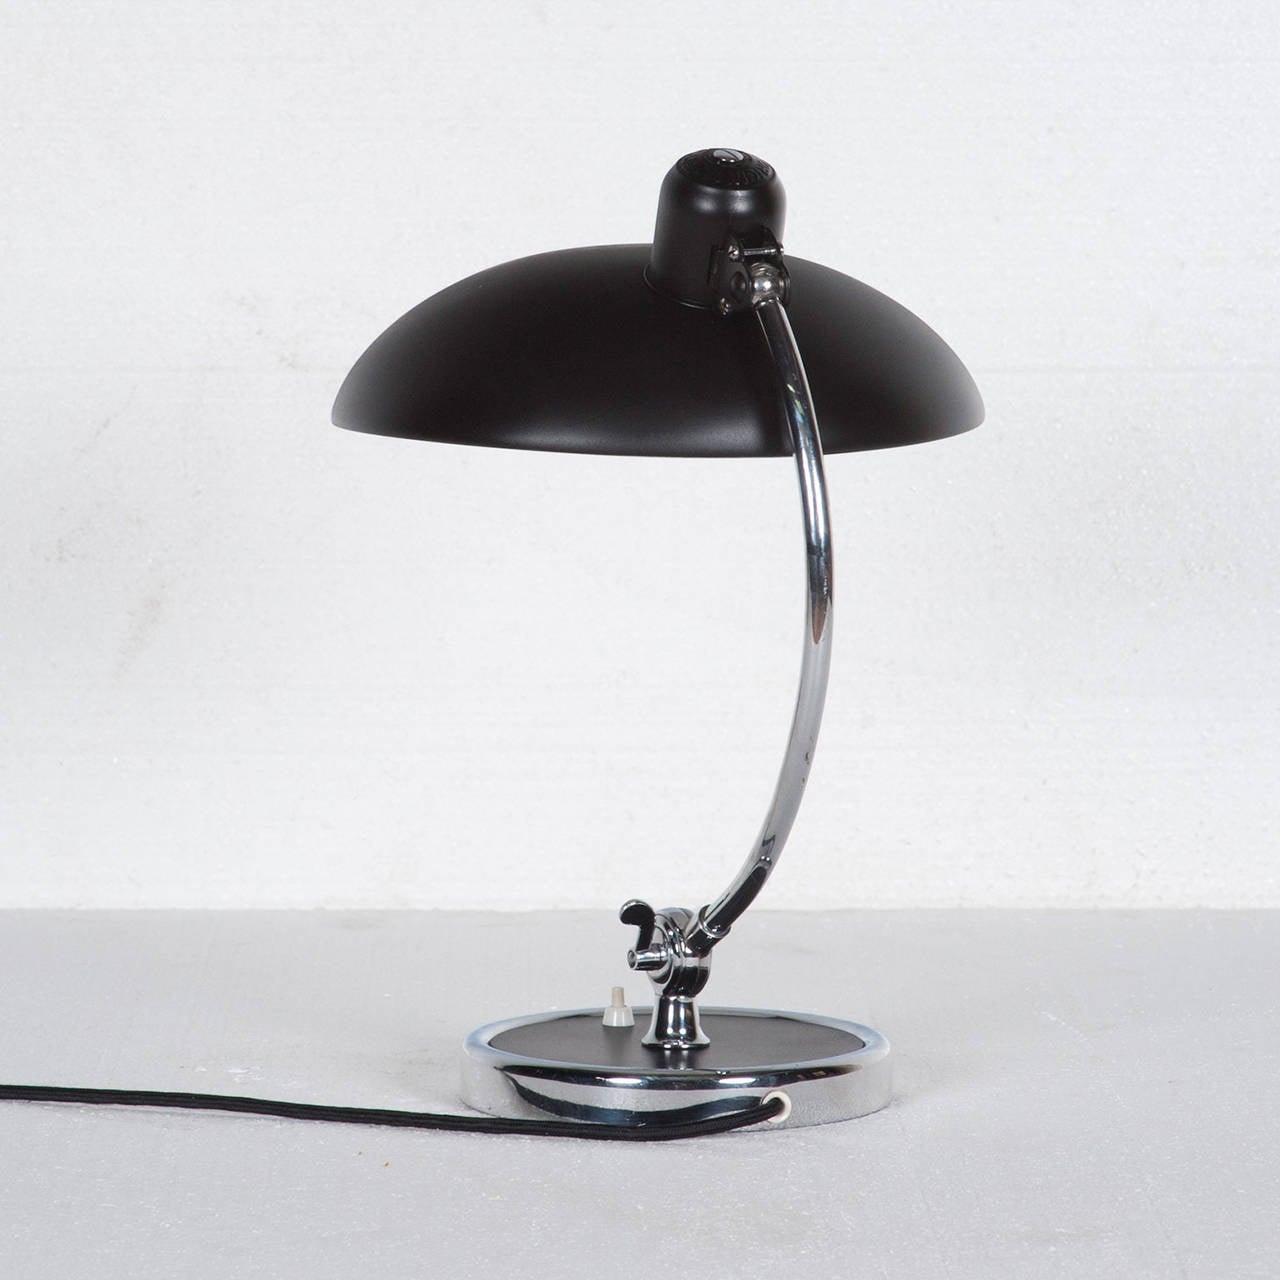 Mid-Century Kaiser Idell model 6631-LUXUS President desk lamp designed by Christian Dell for Kaiser Idell in 1936.  This is an original Bauhaus design and is regarded as one of Christian Dell’s masterpieces. Stunning matte black lampshade and a